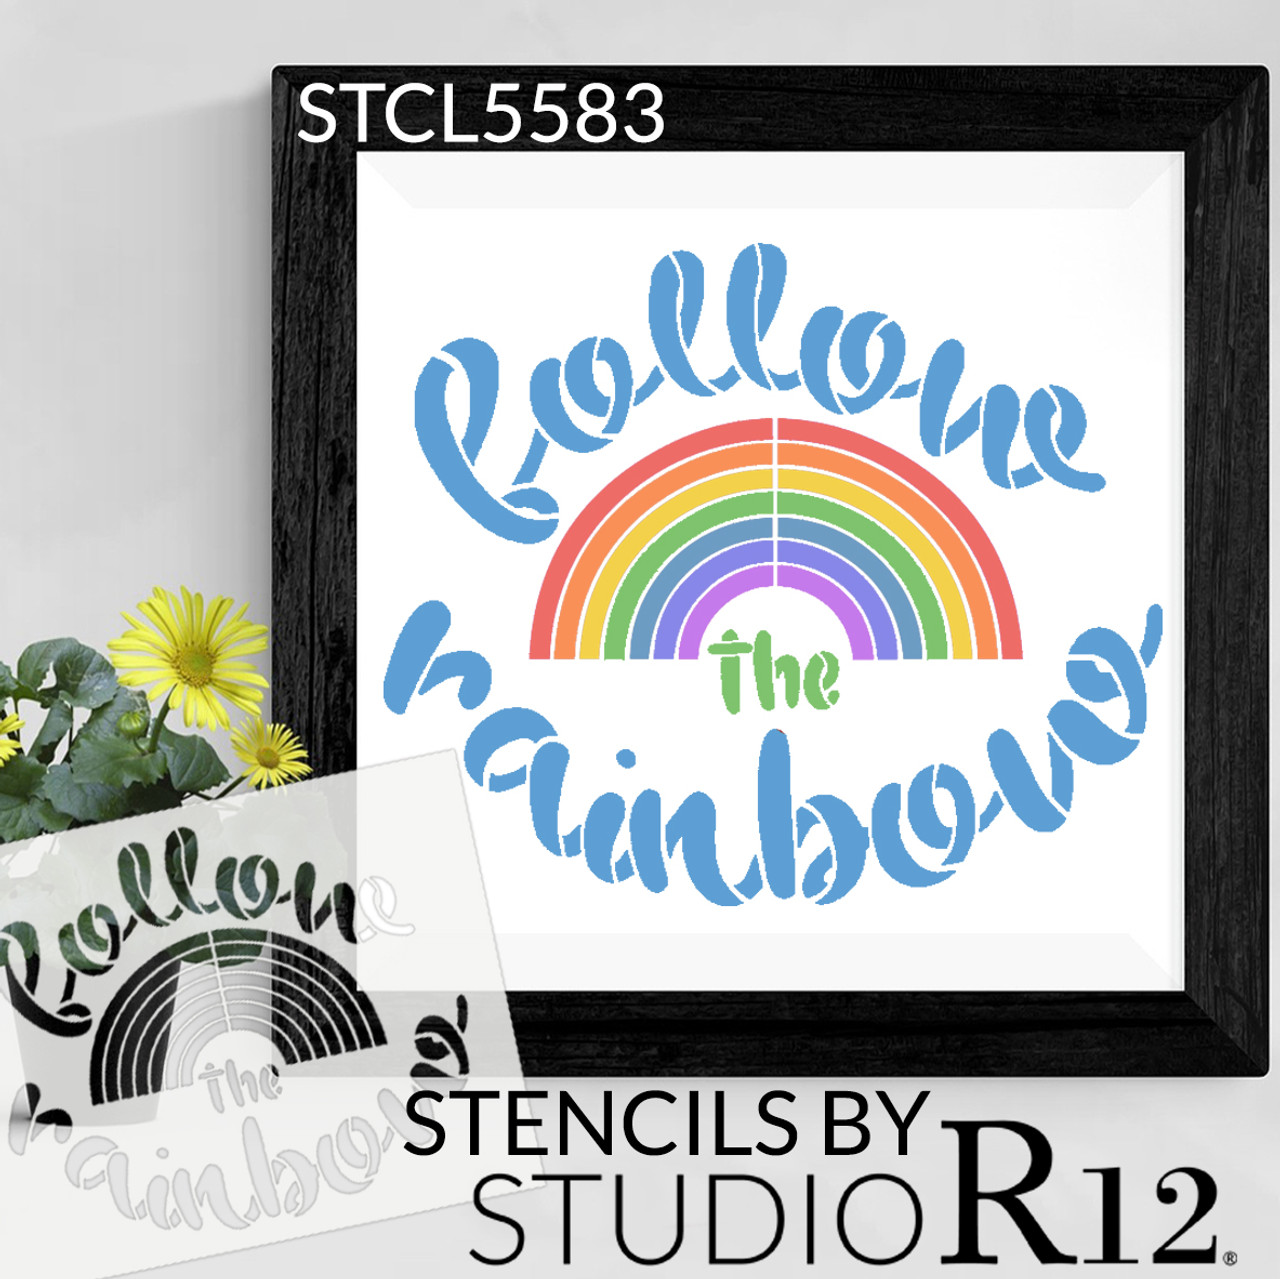 Follow The Rainbow Stencil by StudioR12 | DIY Whimsical Nursery Home Decor | Craft & Paint Fun Wood Signs for Kids | Select Size